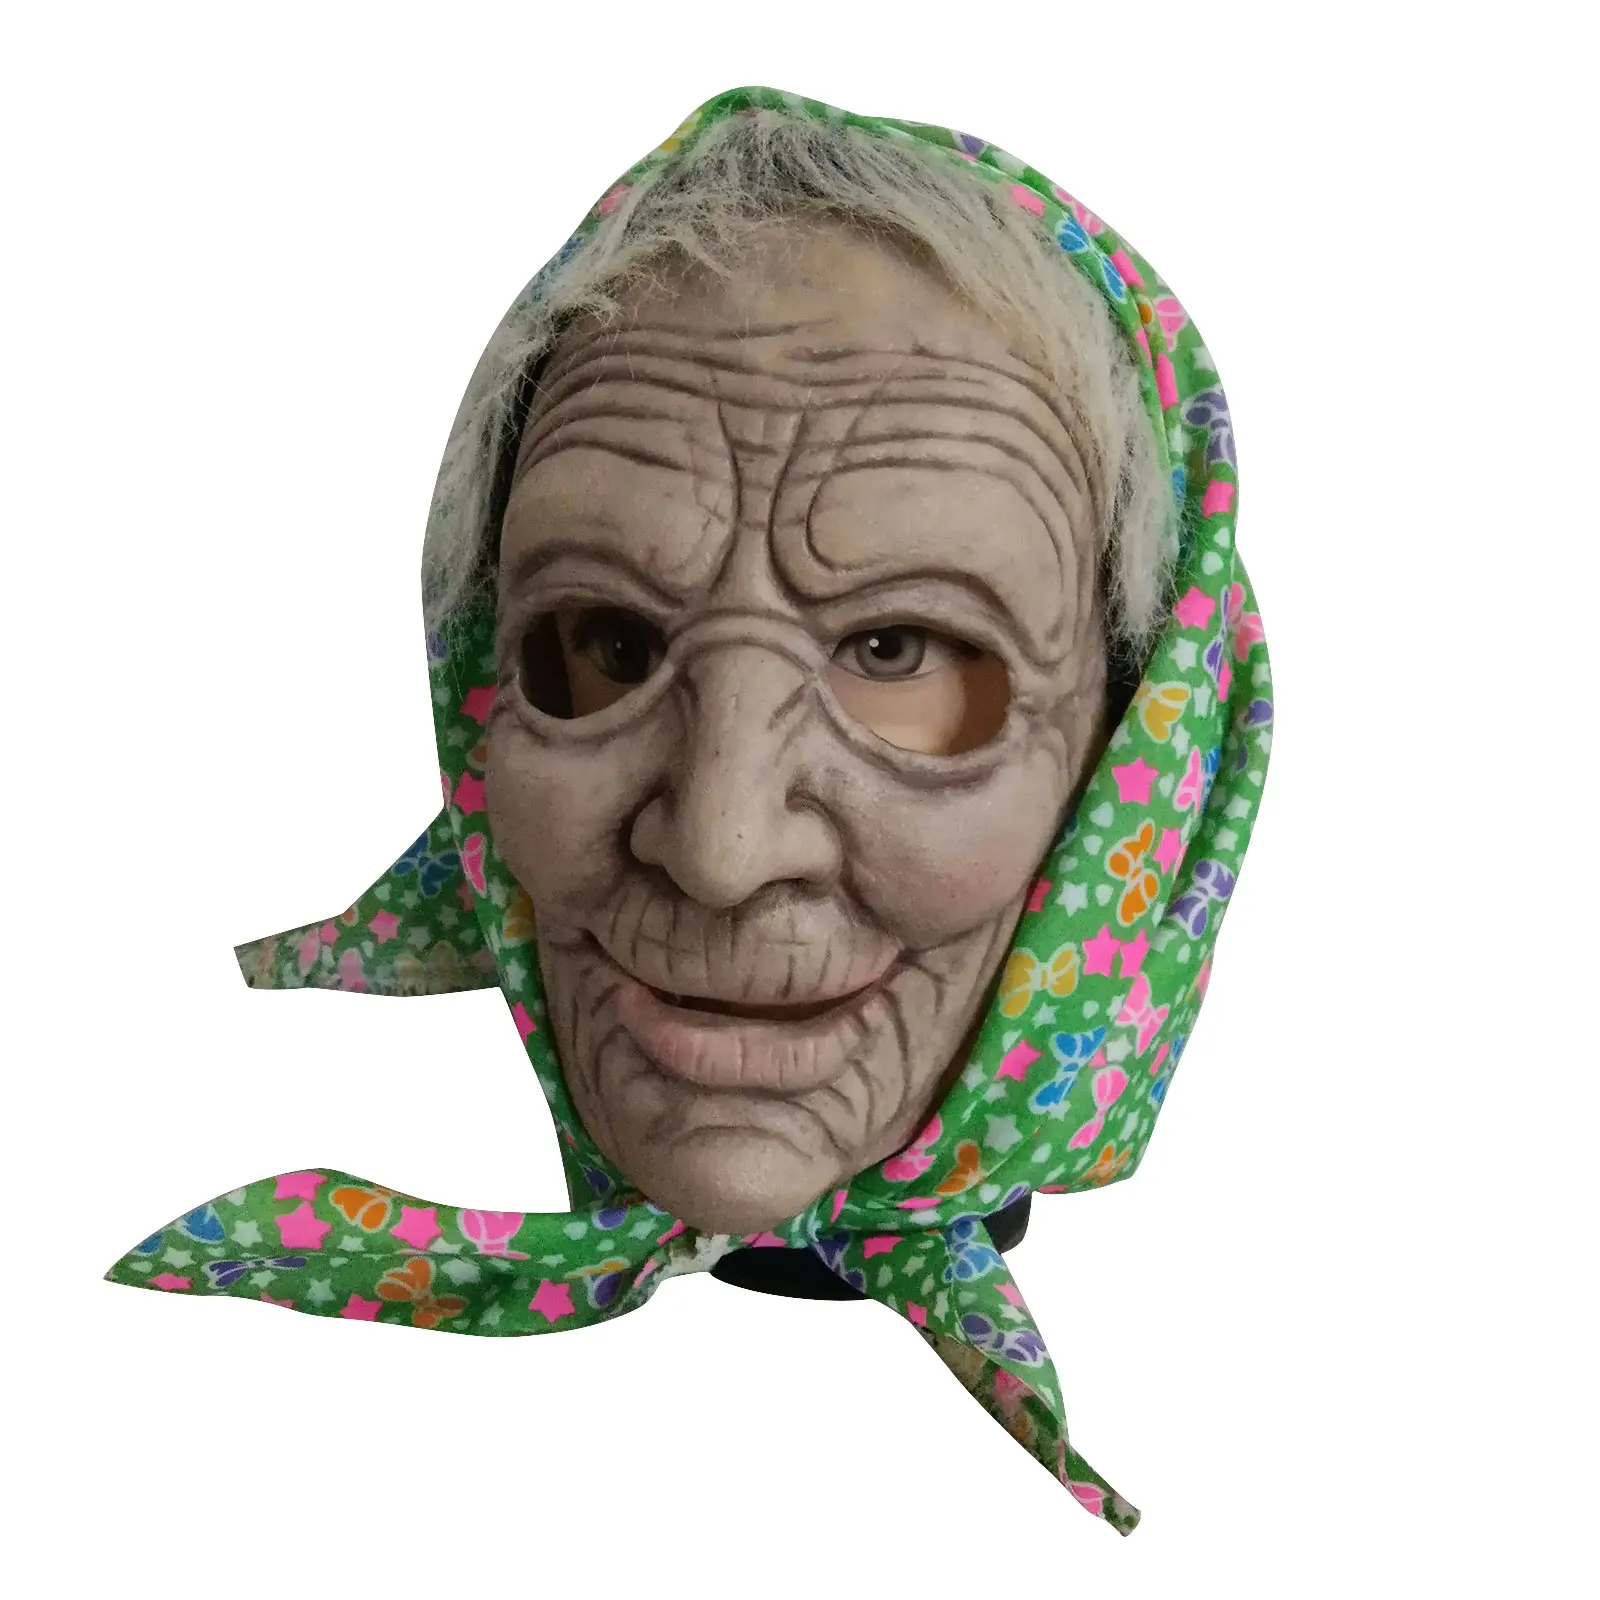 New Halloween Hooded Granny Mask - Old Granny Mask Scary Granny Latex Mask With Hooded Cosplay Prop - AliExpress